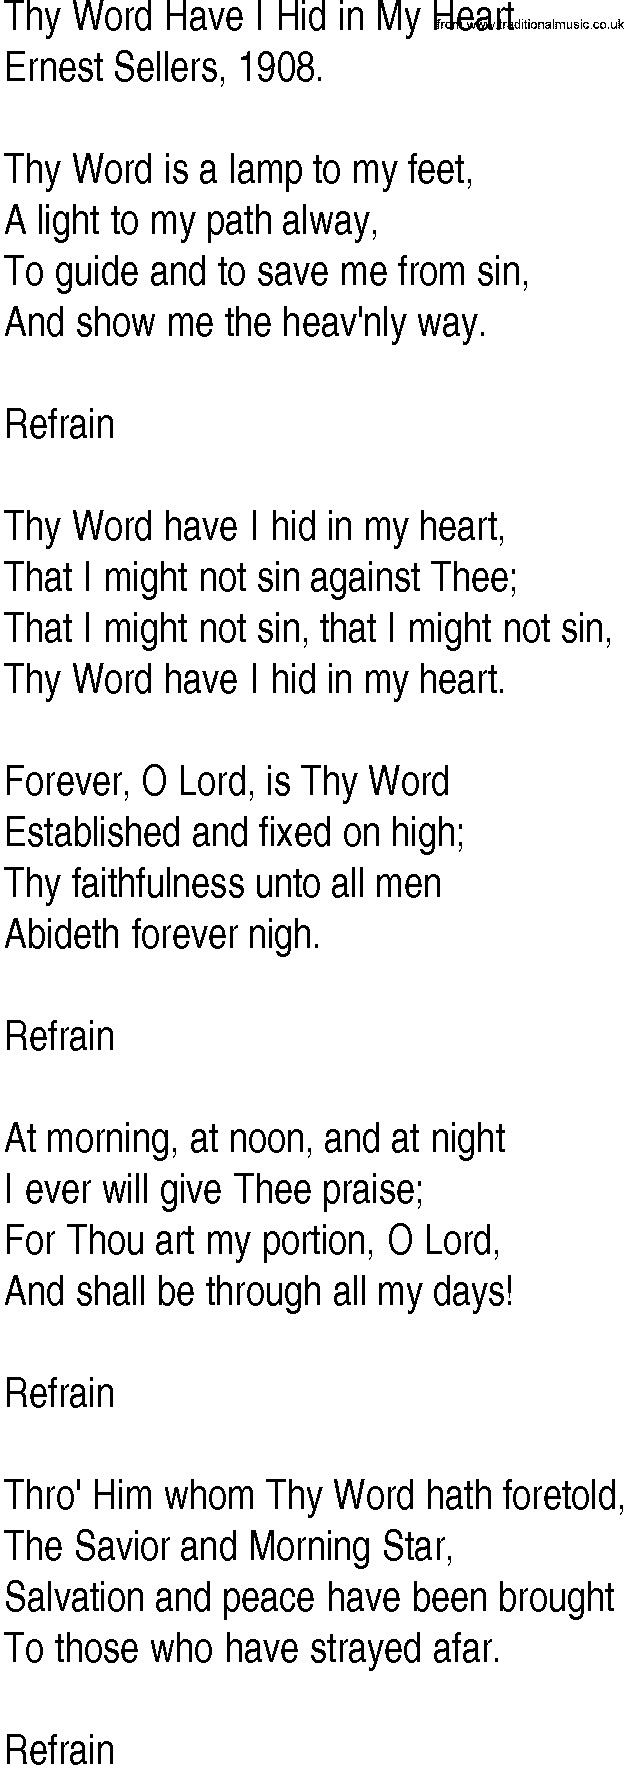 Hymn and Gospel Song: Thy Word Have I Hid in My Heart by Ernest Sellers lyrics